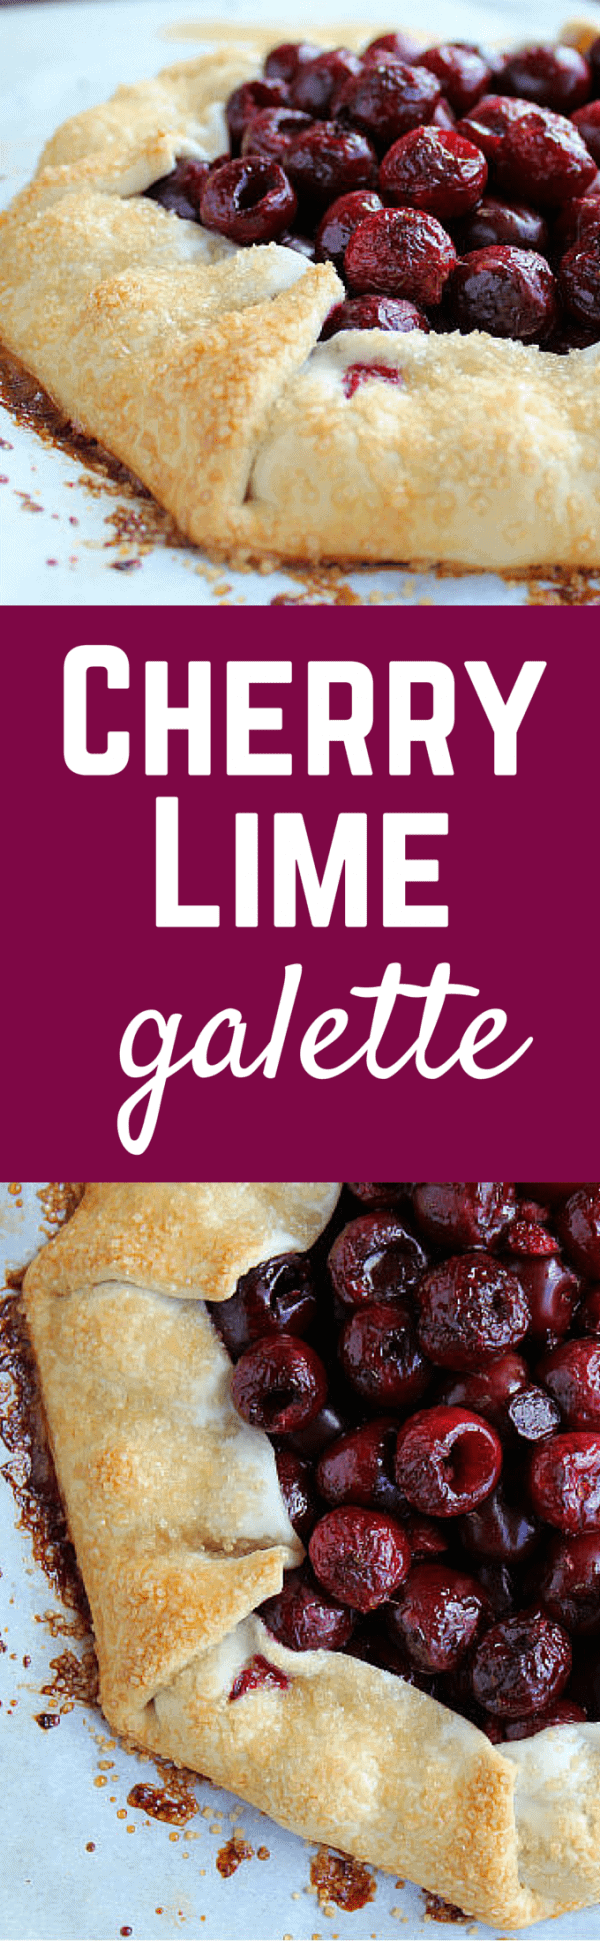 Collage of two closeup photos of galette, with text overlay in the center reading "Cherry Lime Galette."